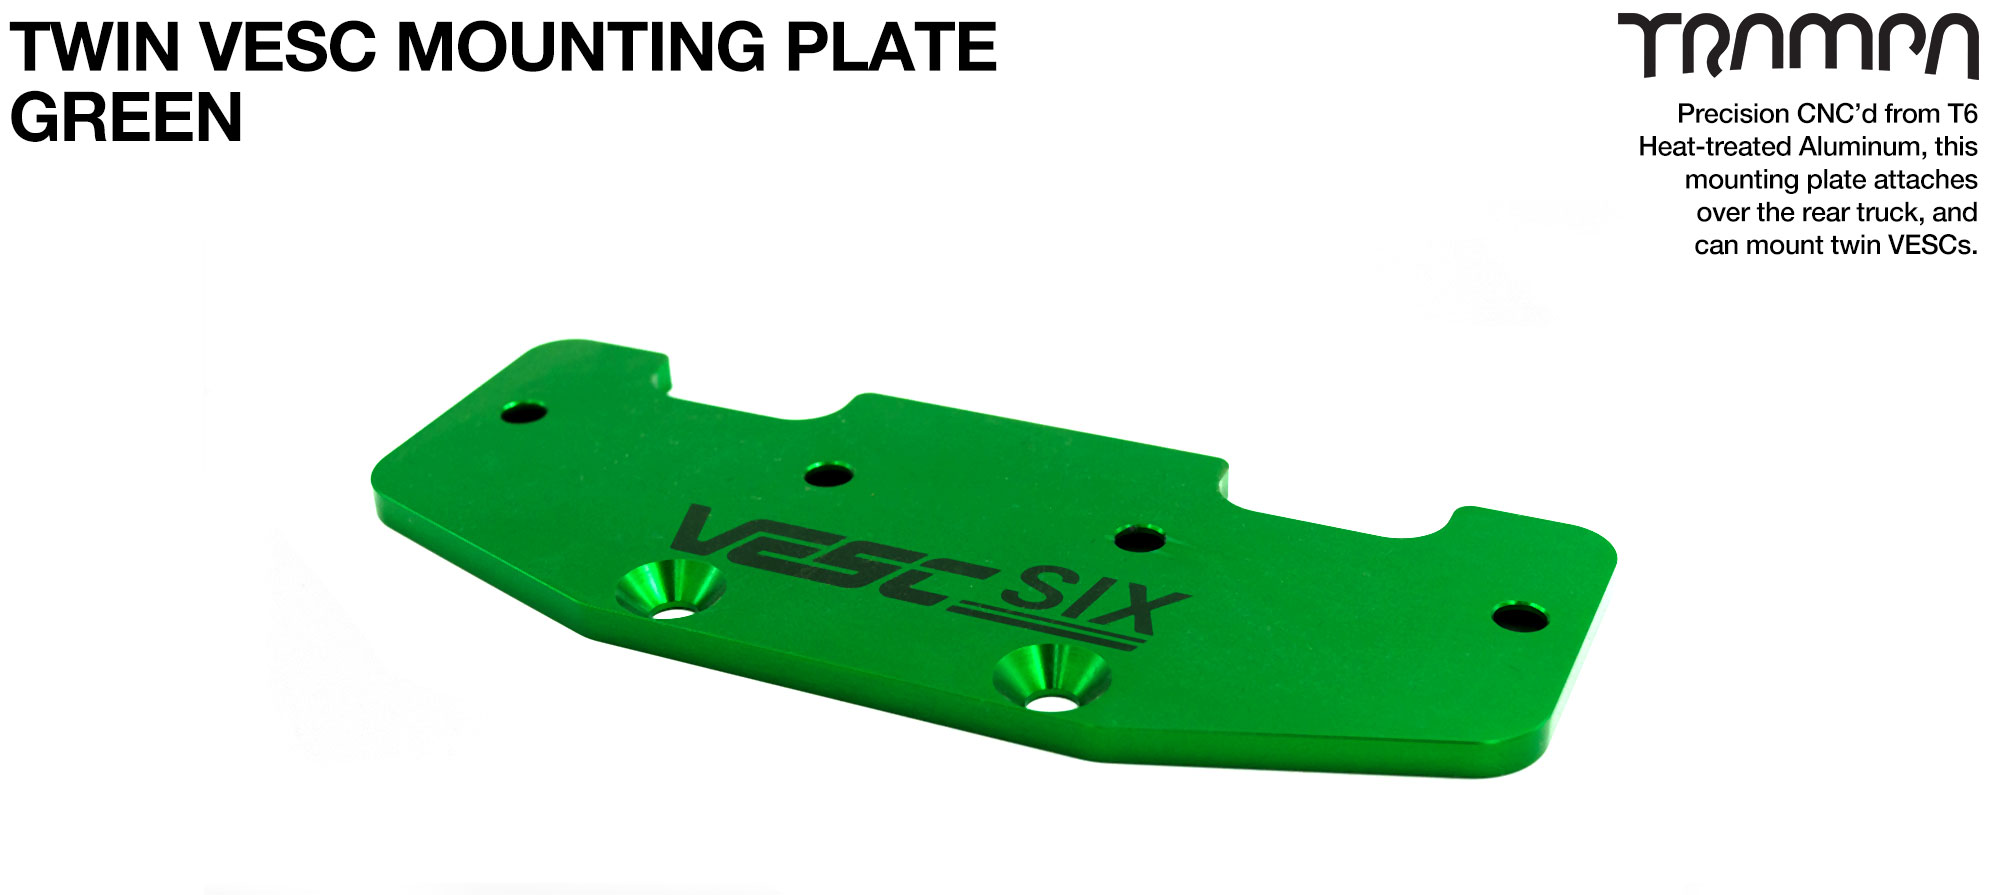 ALUMINIUM mounting Plate for TWIN VESC 6 - Anodised GREEN 